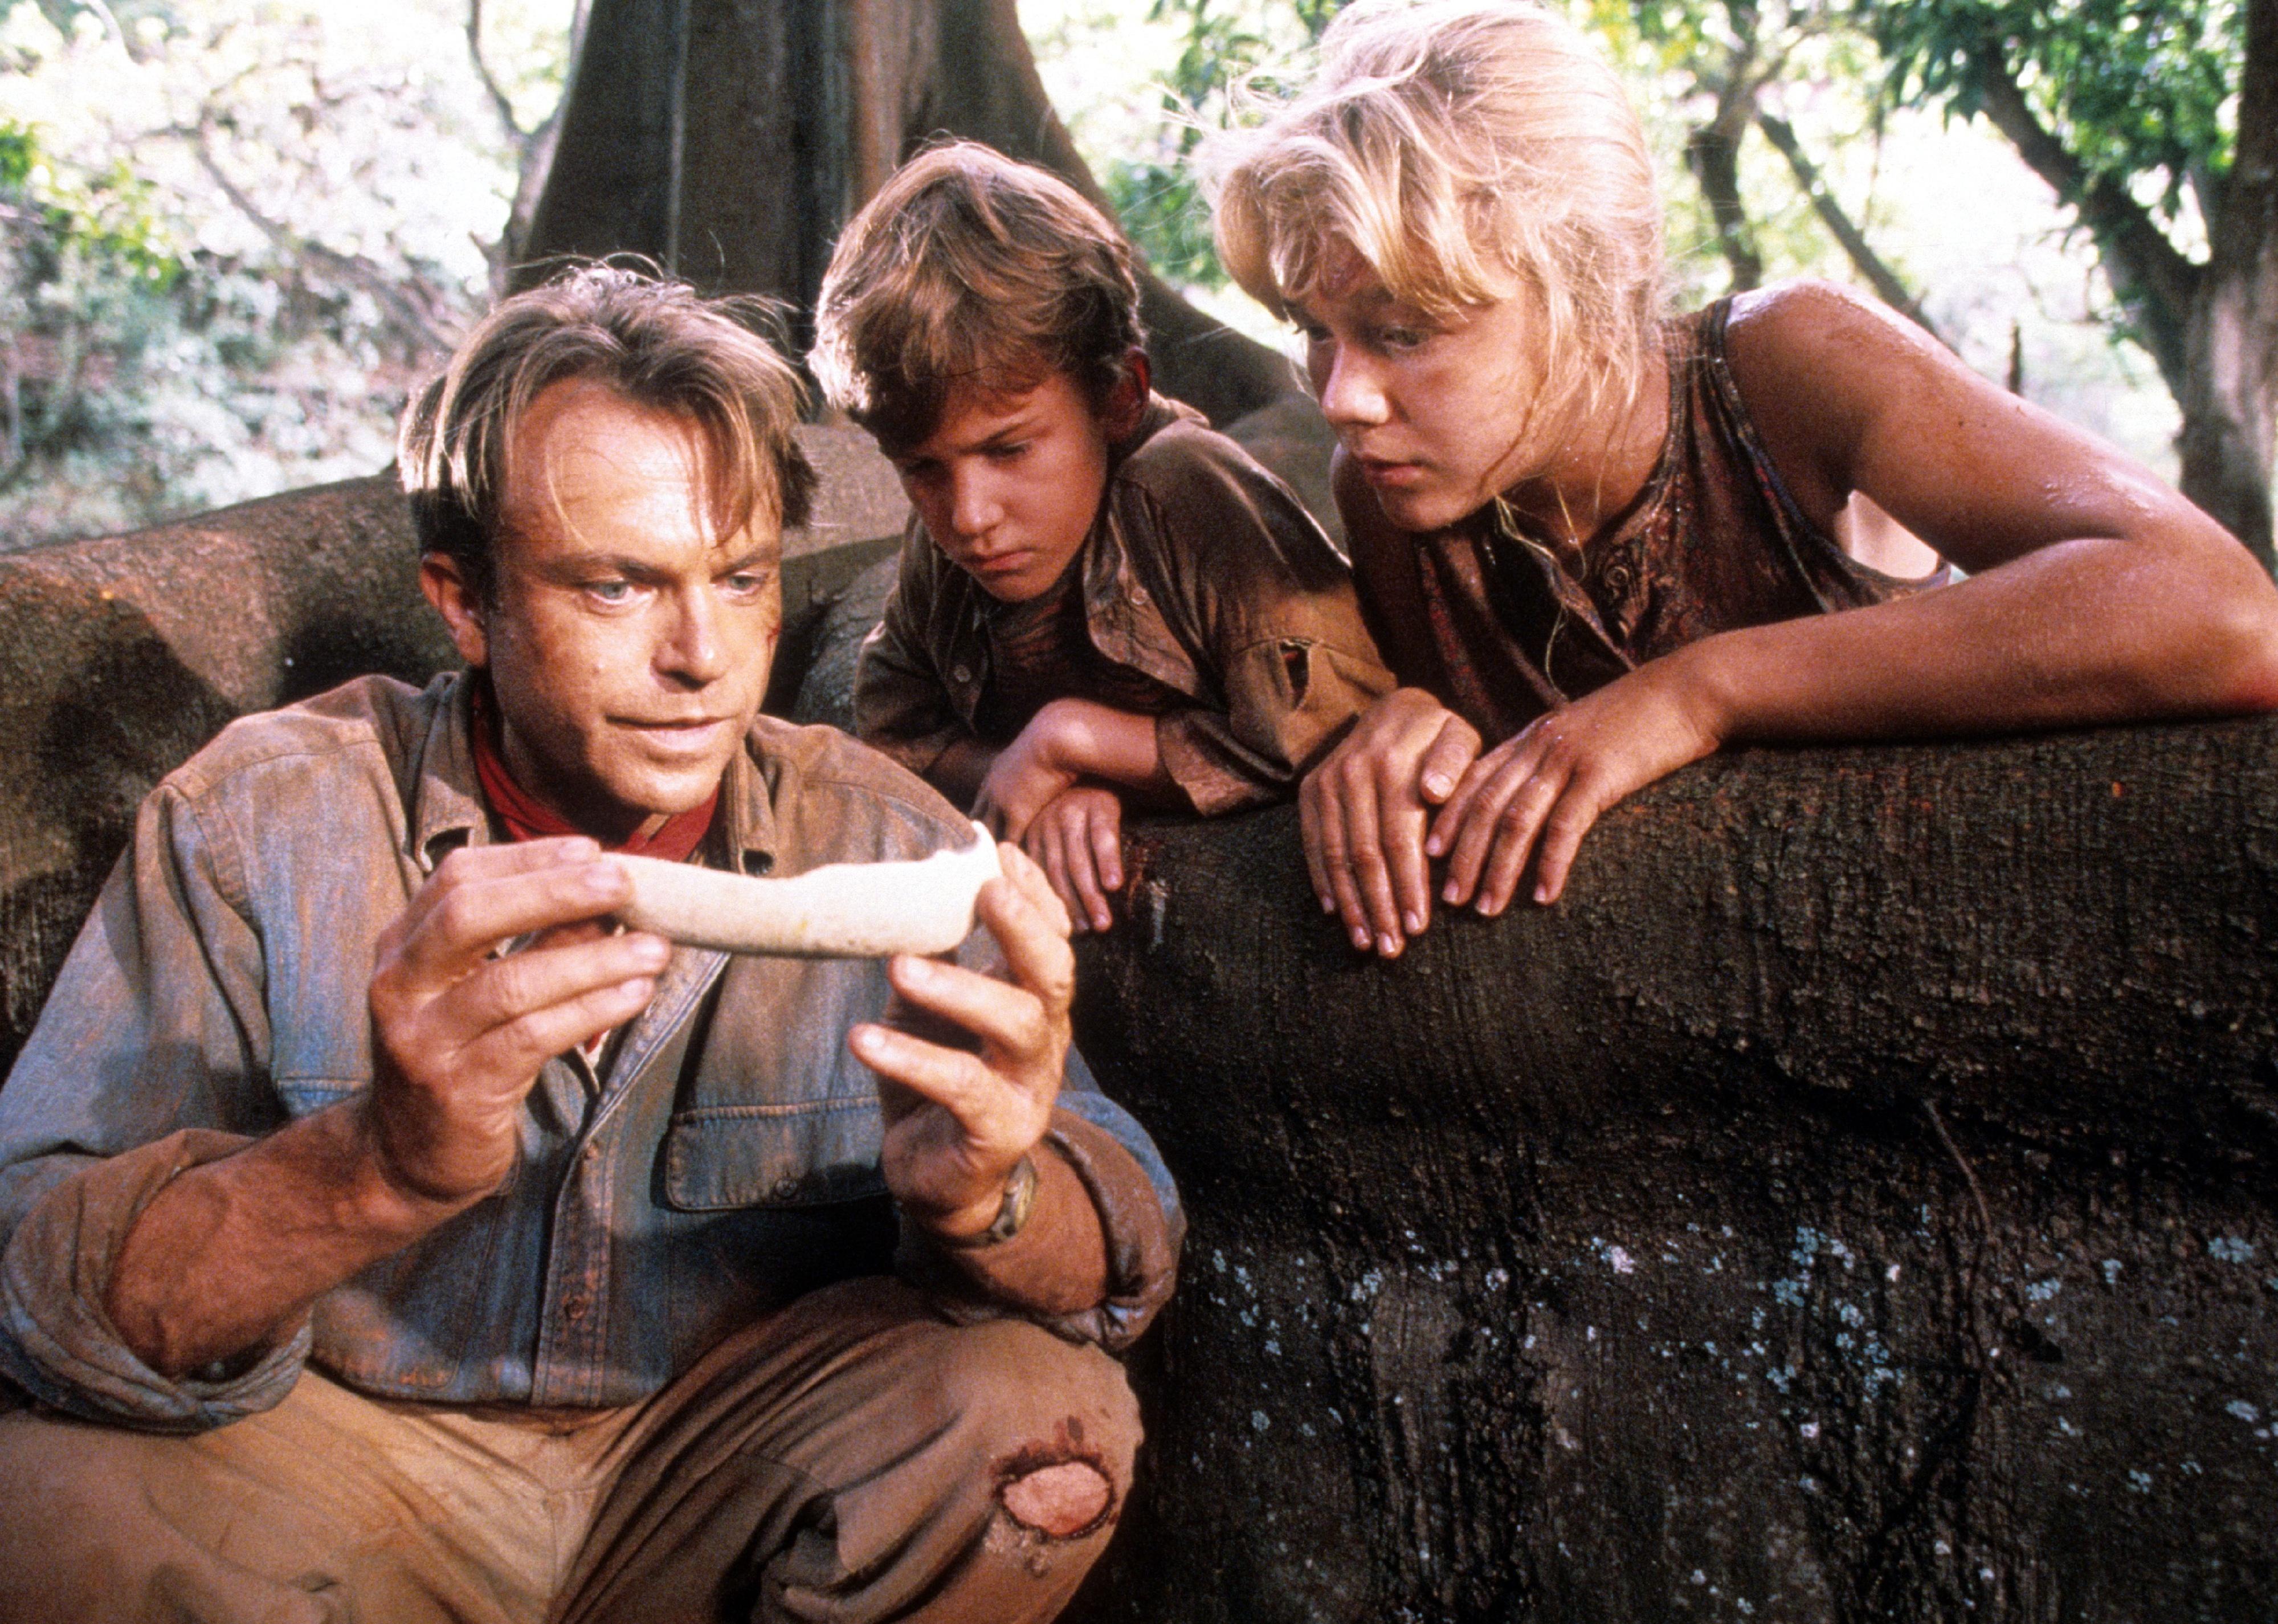 Sam Neill showing a bone to Joseph Mazzello and Ariana Richards in a scene from 'Jurassic Park'.